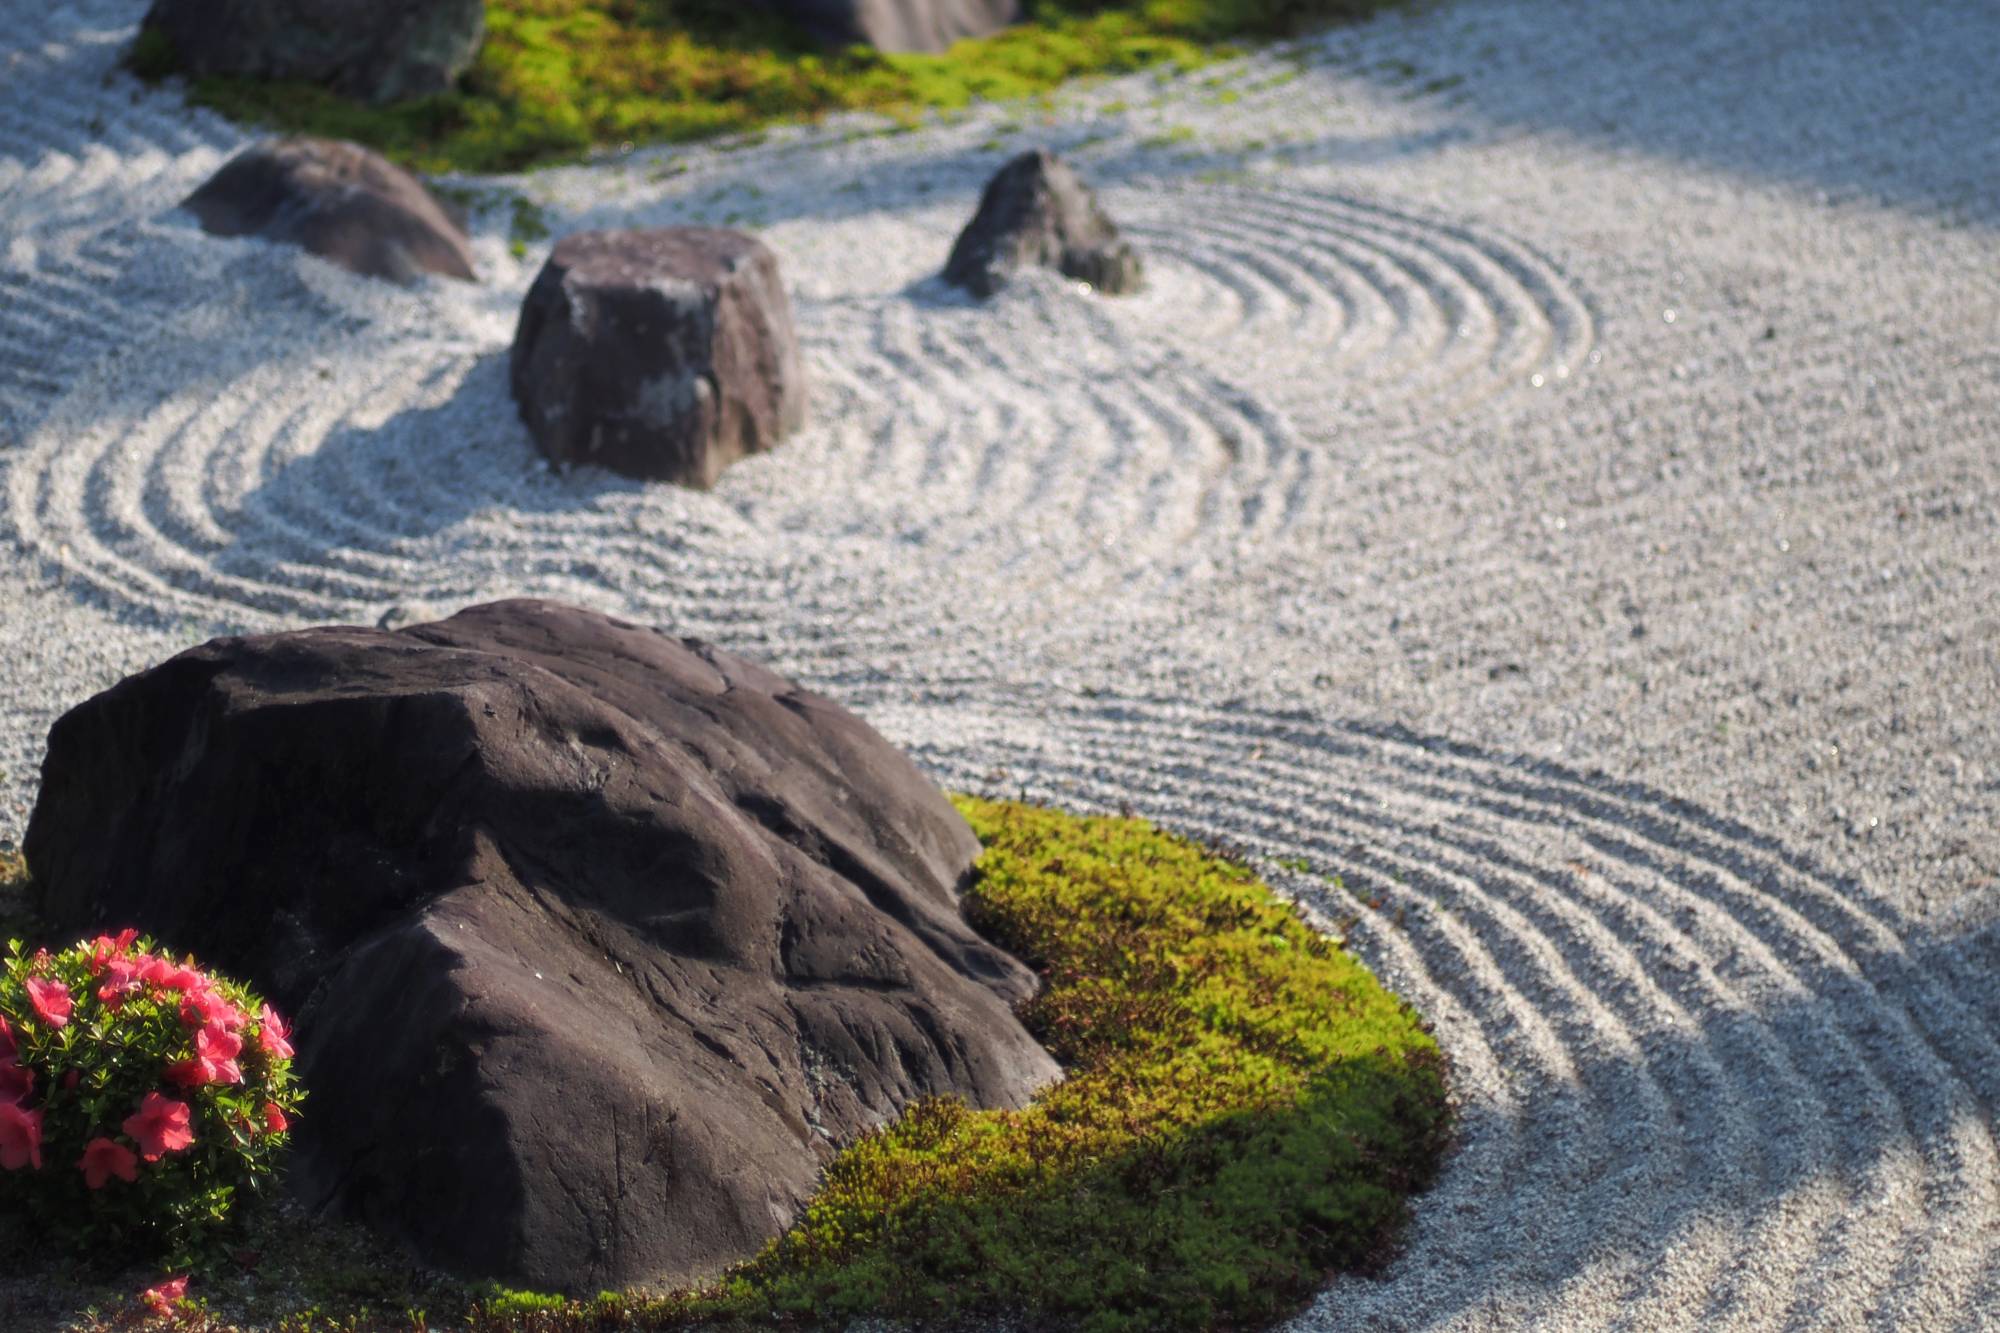 Landscape artist Marc Peter Keane has lived in Kyoto for more than 20 years, and his collection of essays, “Of Arcs and Circles,” are deeply influenced by Japanese aesthetics.  | GETTY IMAGES